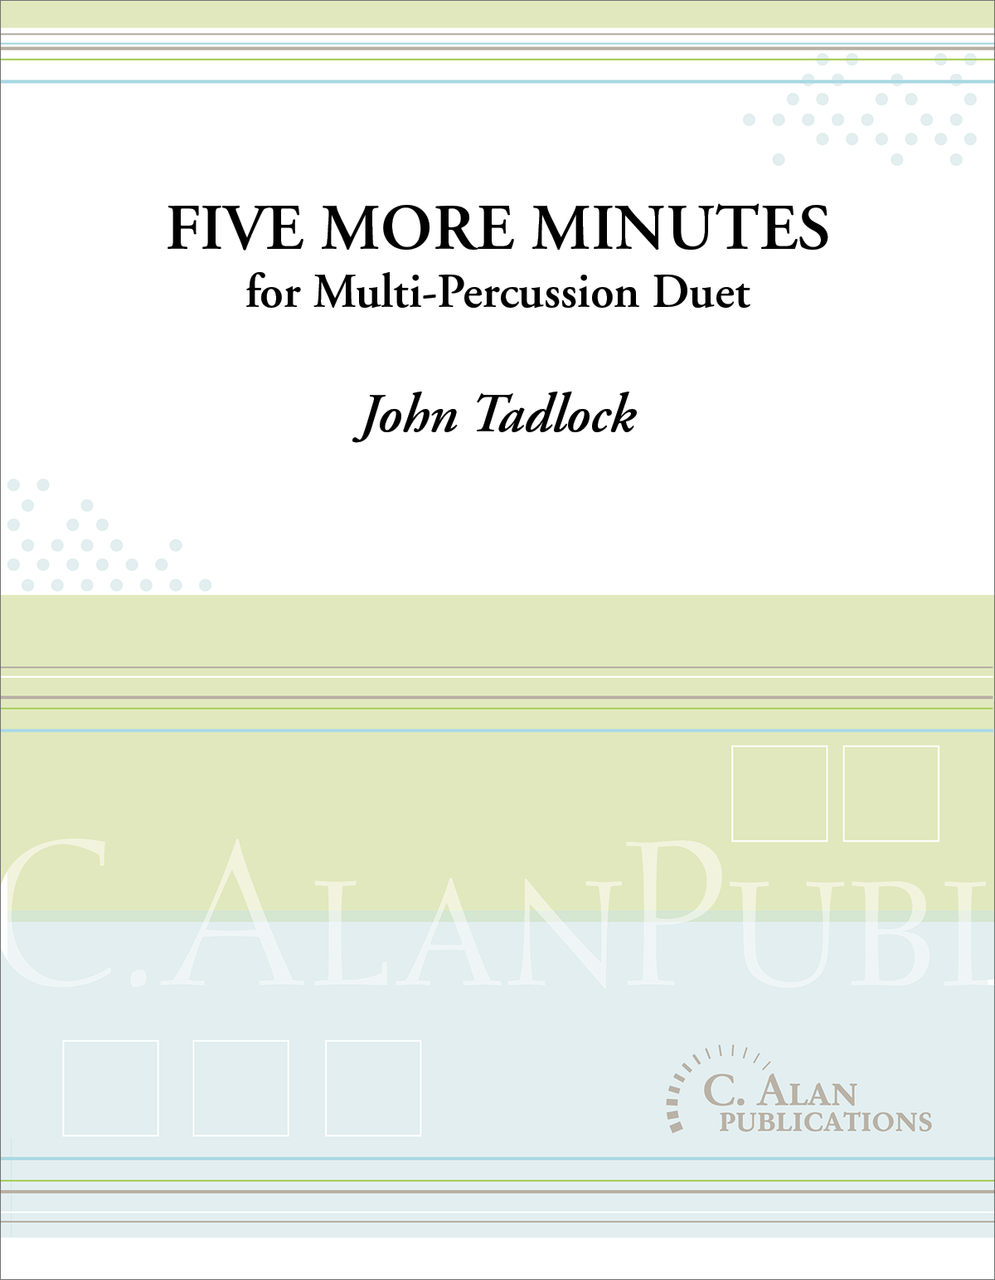 Five More Minutes by John Tadiock